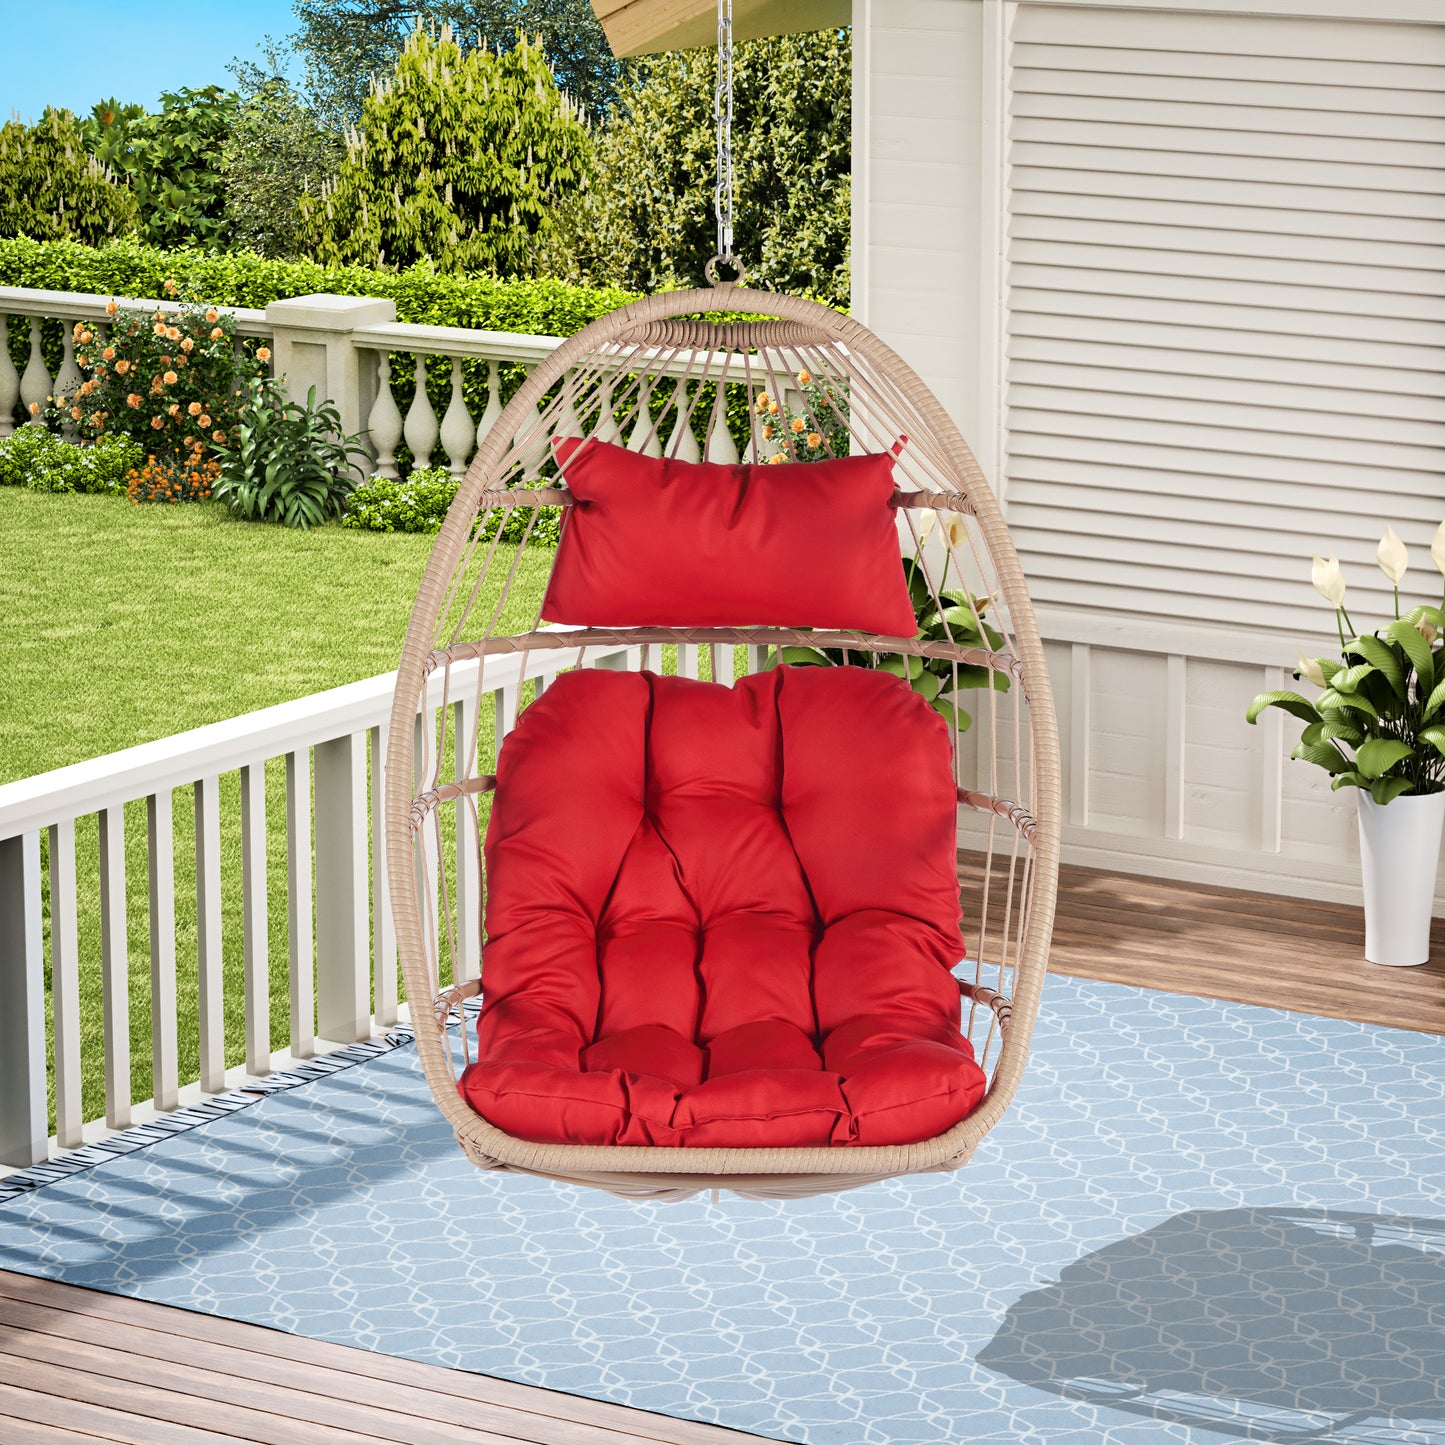 Outdoor Garden Rattan Egg Swing Chair Hanging Chair Wood+Red cushion